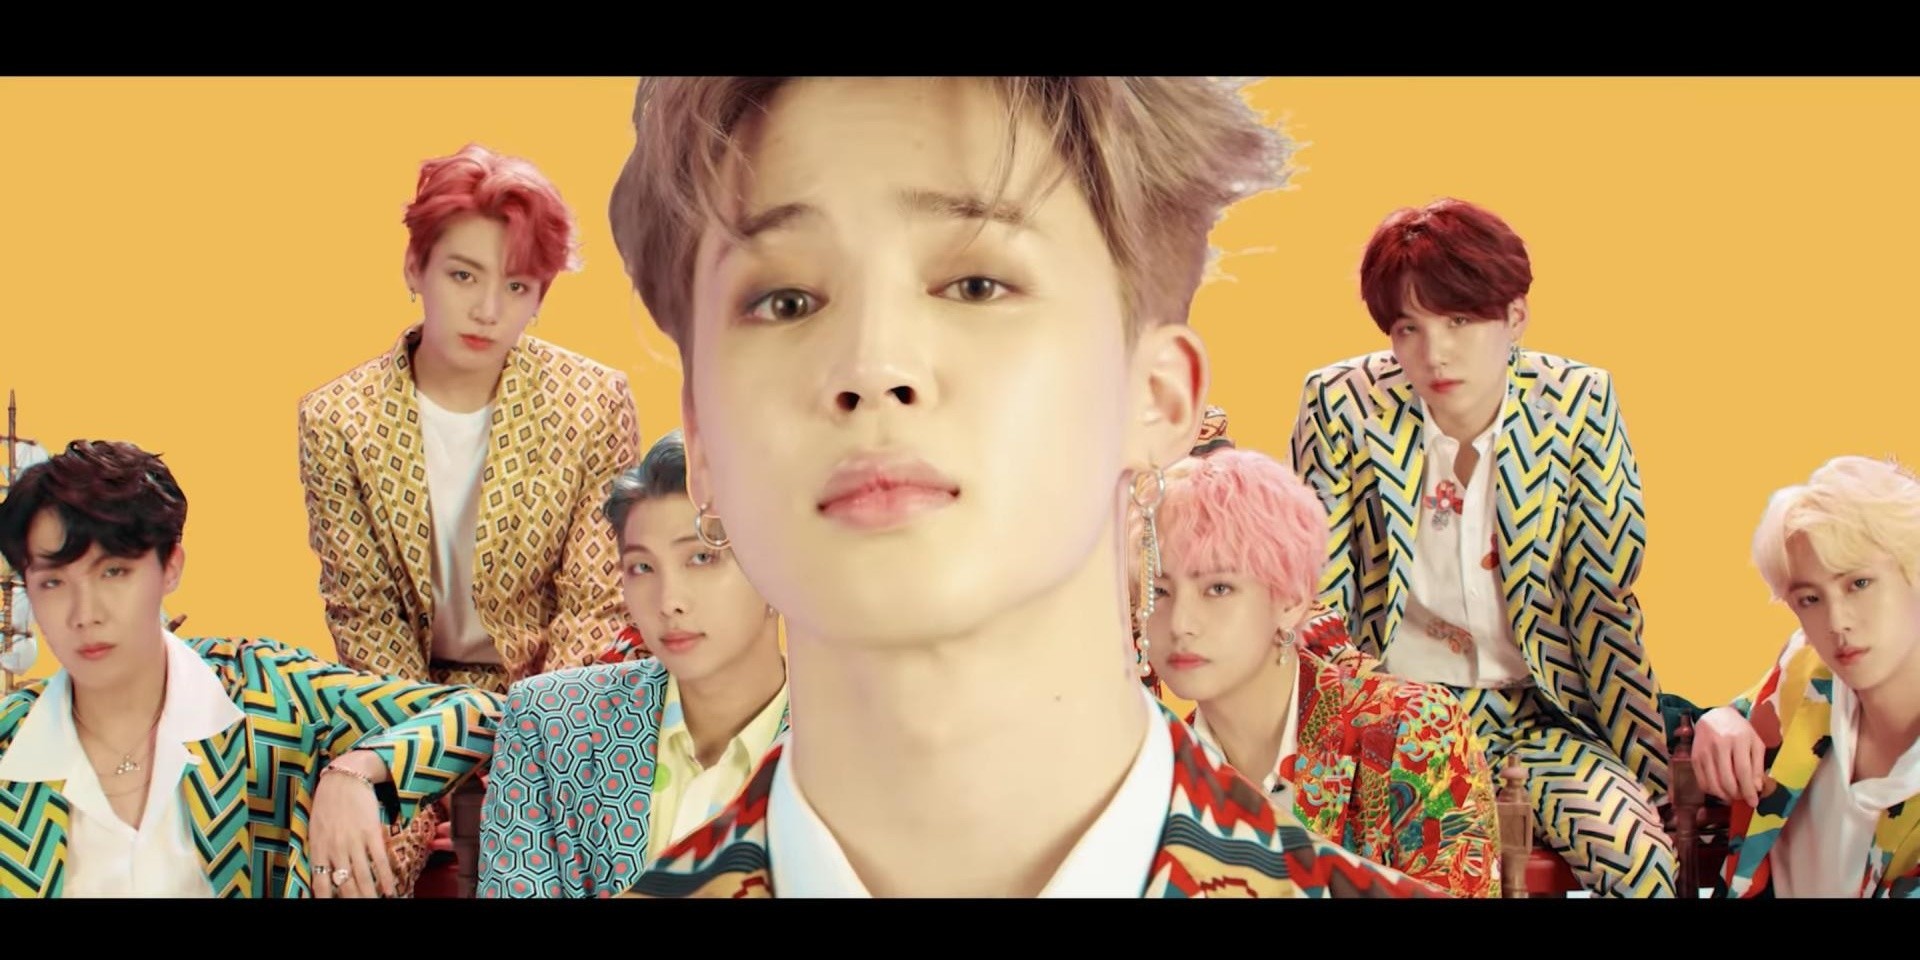 BTS and Nicki Minaj release colourful music video for 'Idol' – watch